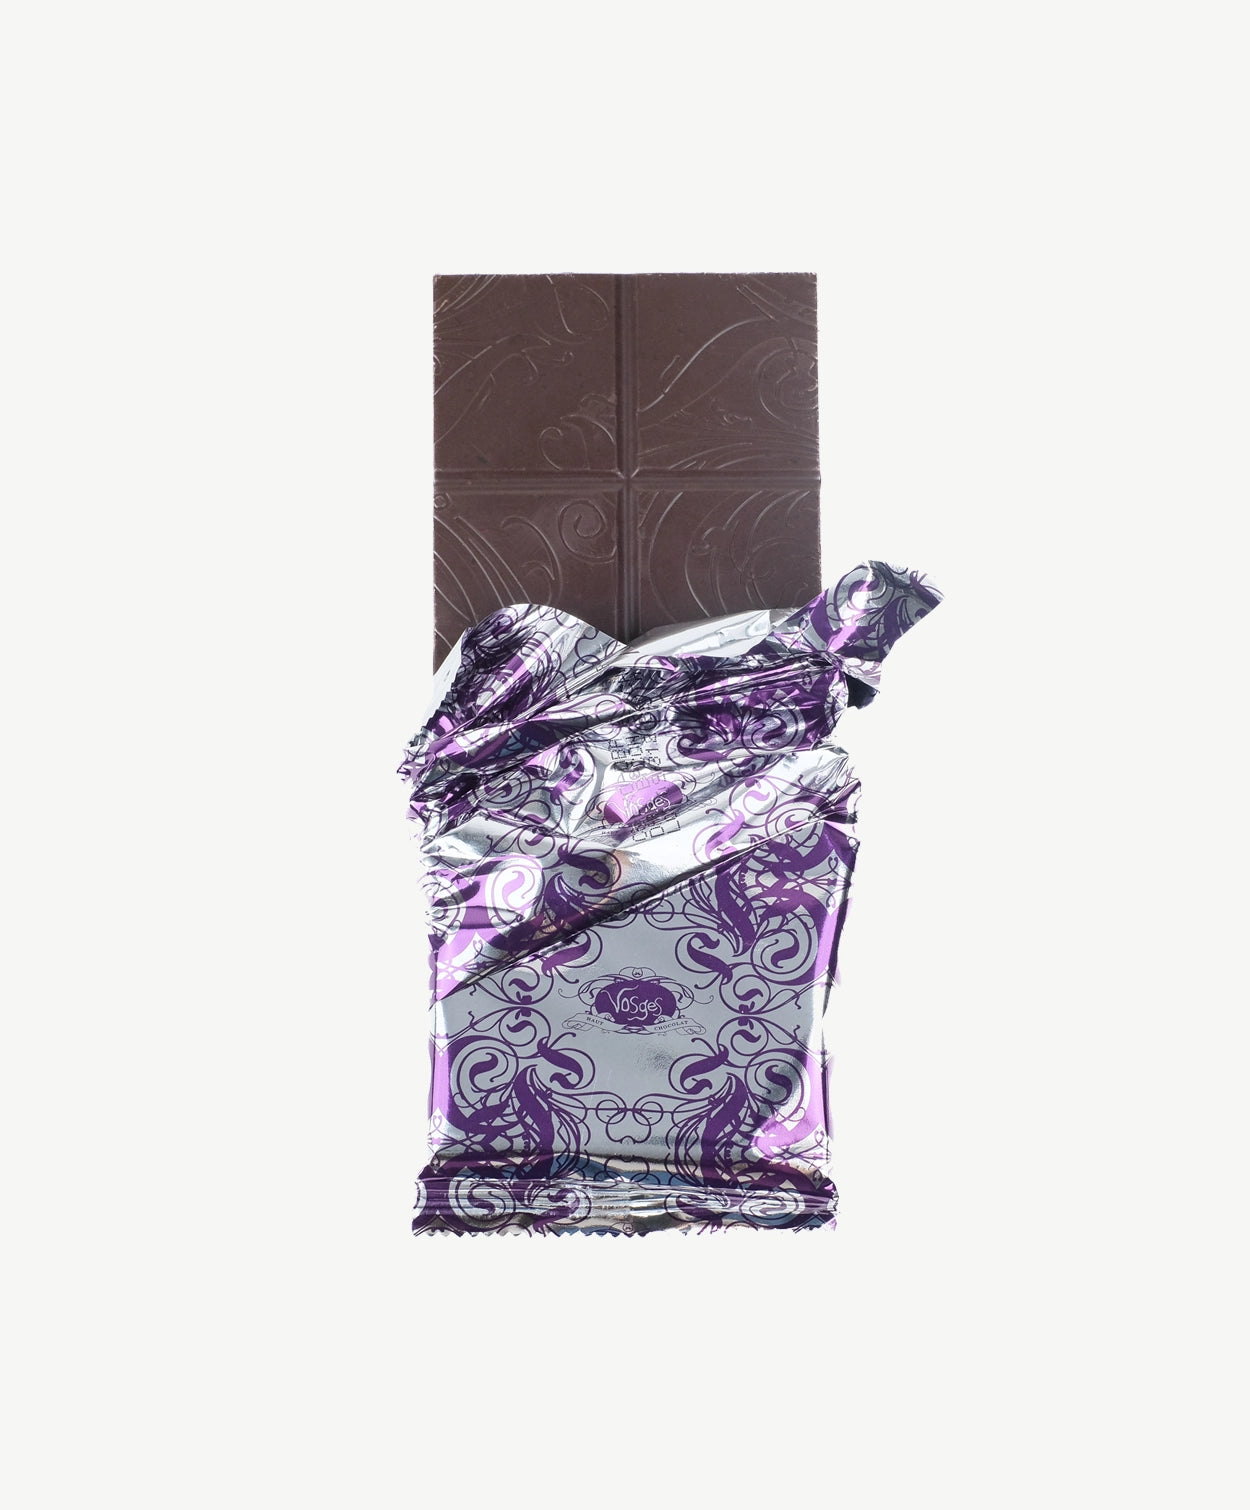 Unwrapped Vosges Matcha Green Tea Chocolate bar in a silver wrapper stands upright on a white background.